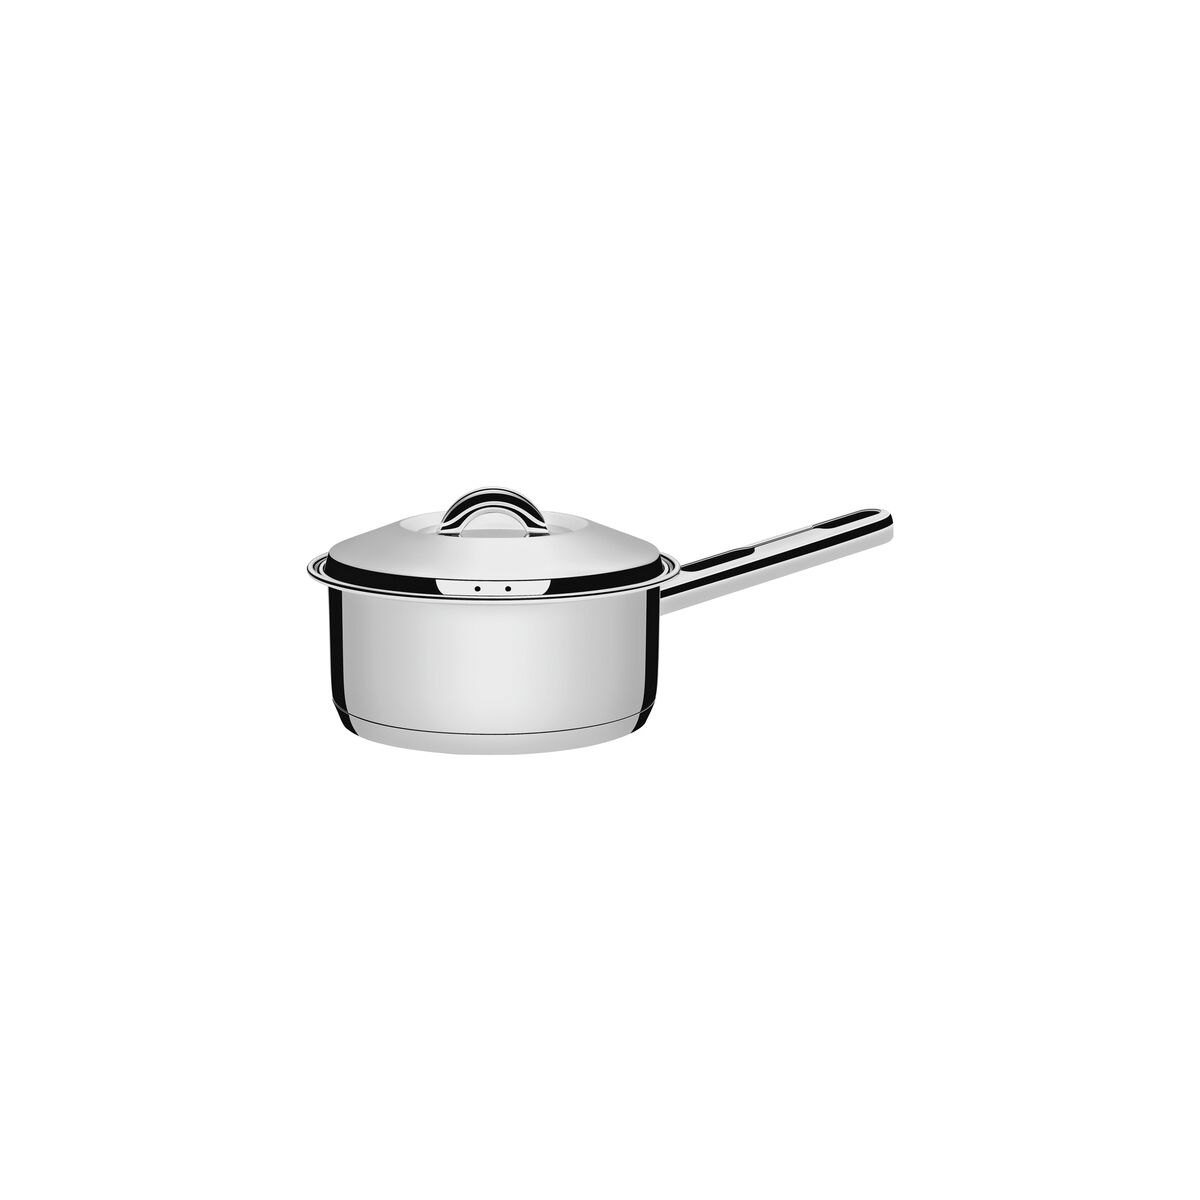 Tramontina Solar 14 cm 1.1 L stainless steel saucepan with lid, handle and tri-ply base